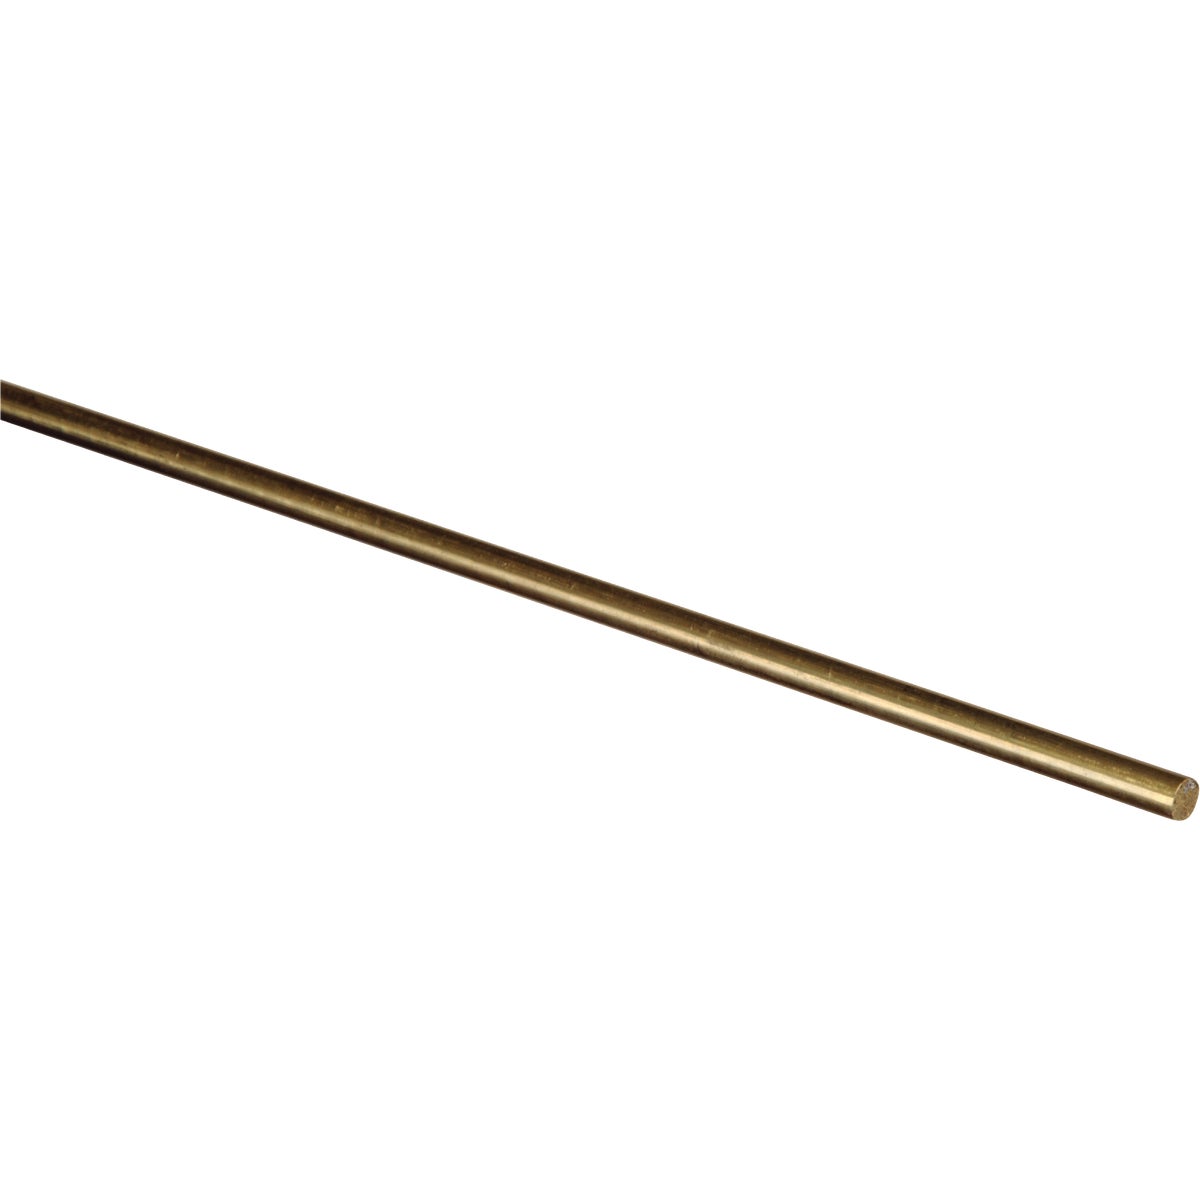 Item 720376, Solid round rods are traditionally used for axles, tent pegs, plant stakes 